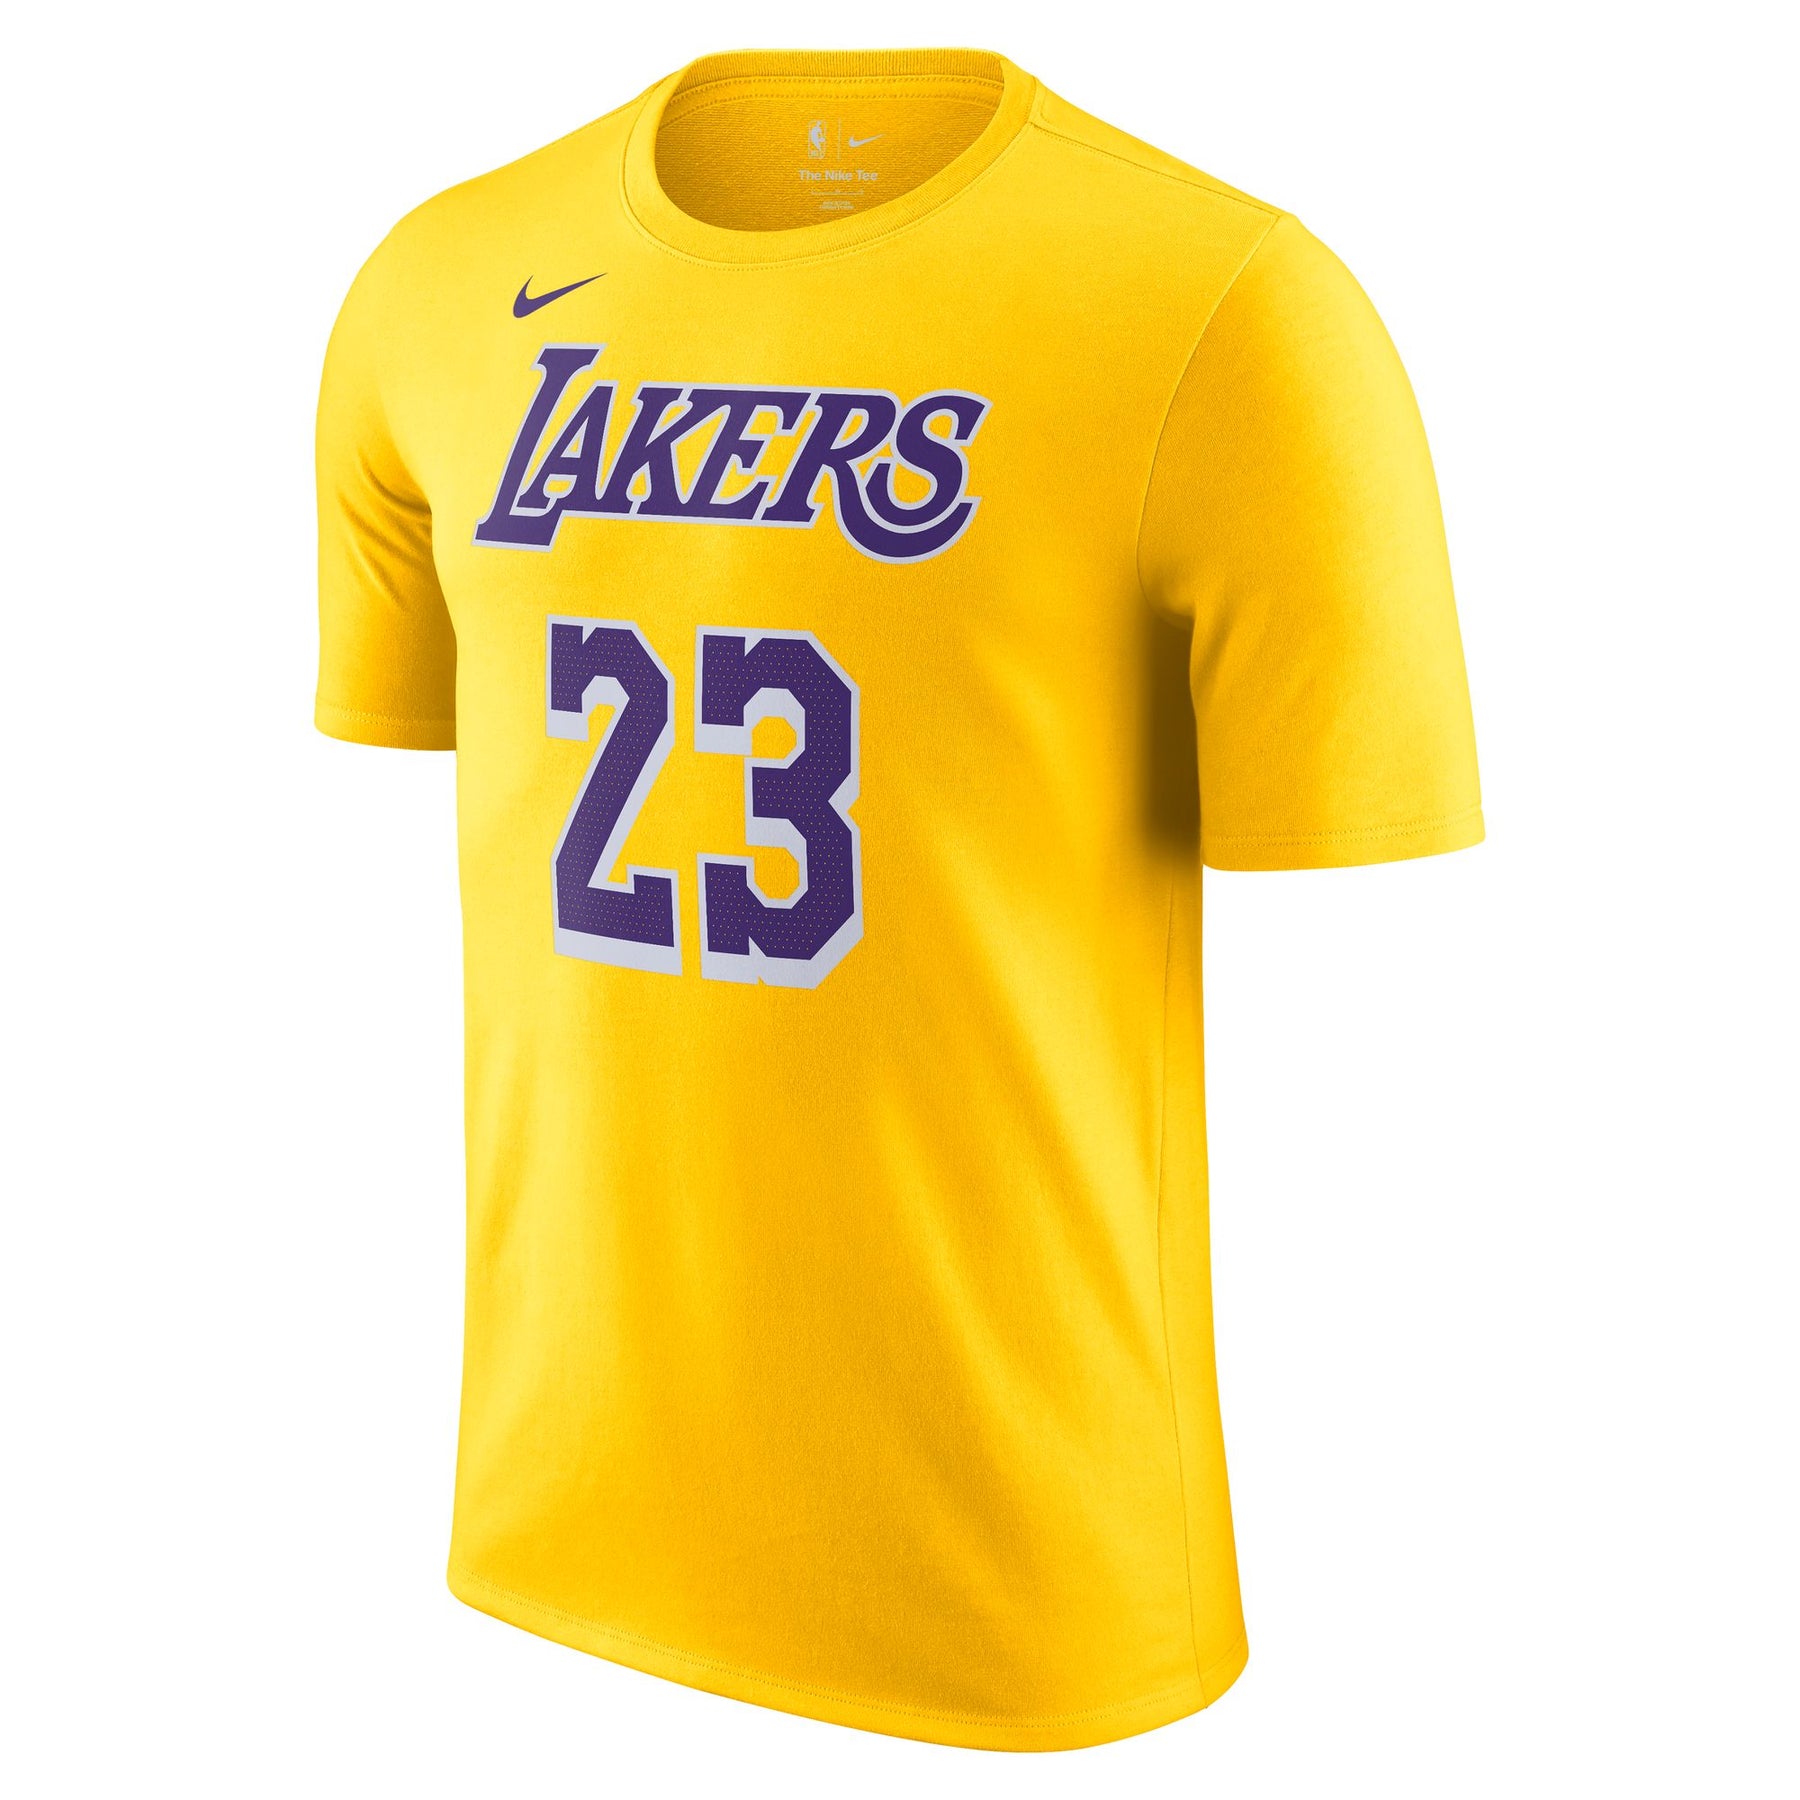 LeBron James Professional Basketball Player Of Los Angeles Lakers T-Shirt -  Bring Your Ideas, Thoughts And Imaginations Into Reality Today